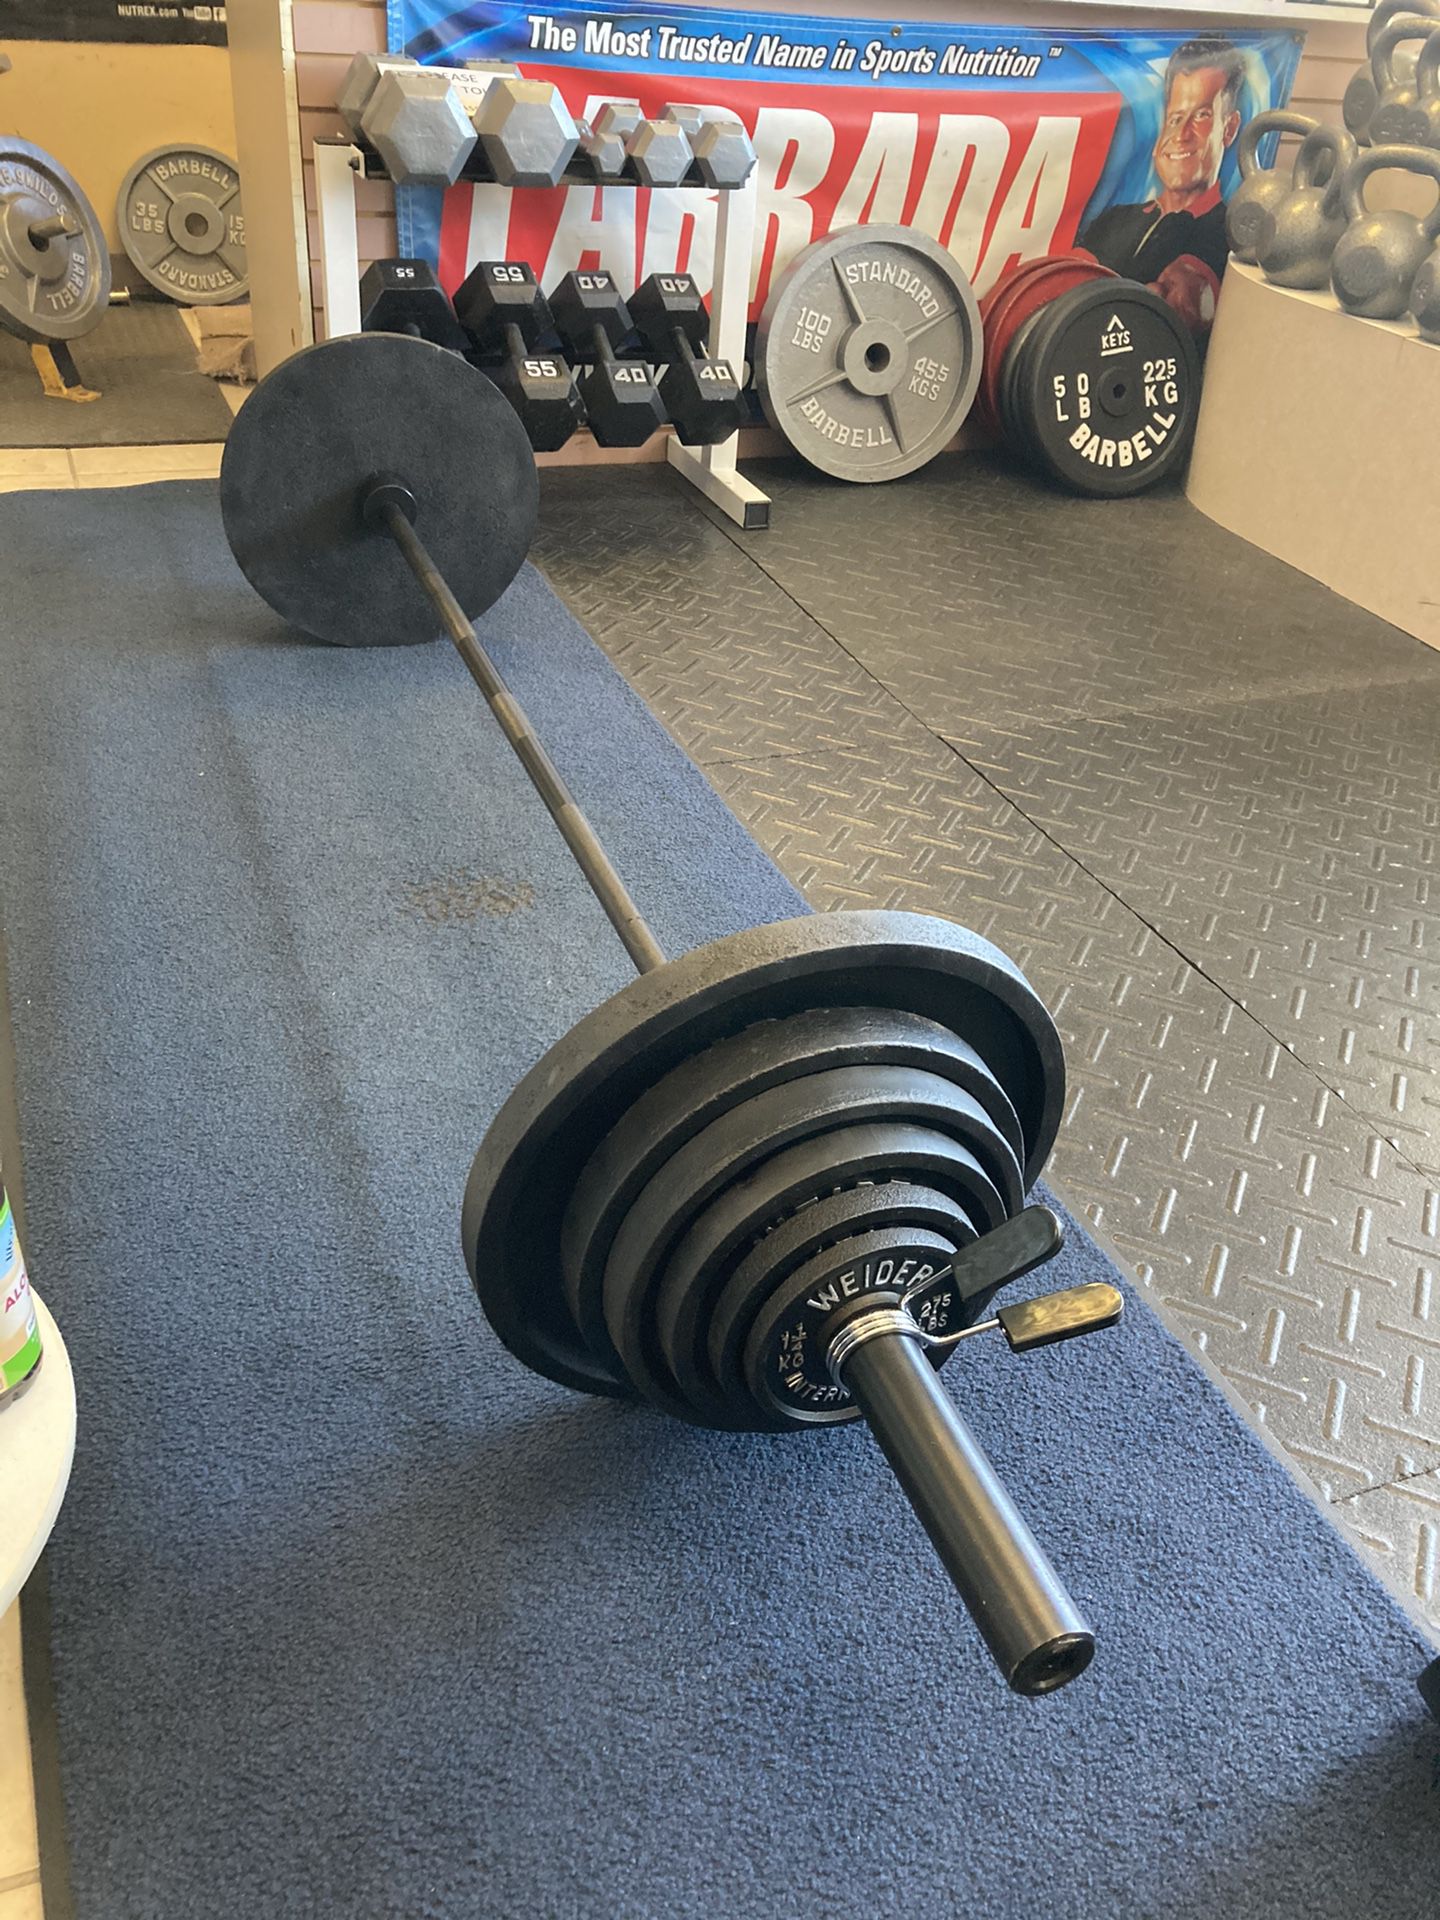 236.50LBS WEIDER INTERNATIONAL OLYMPIC BARBELL SET 45lbs 7 Foot OLYMPIC BARBELL included with Lock Clips. 2x44lbs, 2x33lbs, 2x22lbs, 2x11lbs, 2x5.5lb